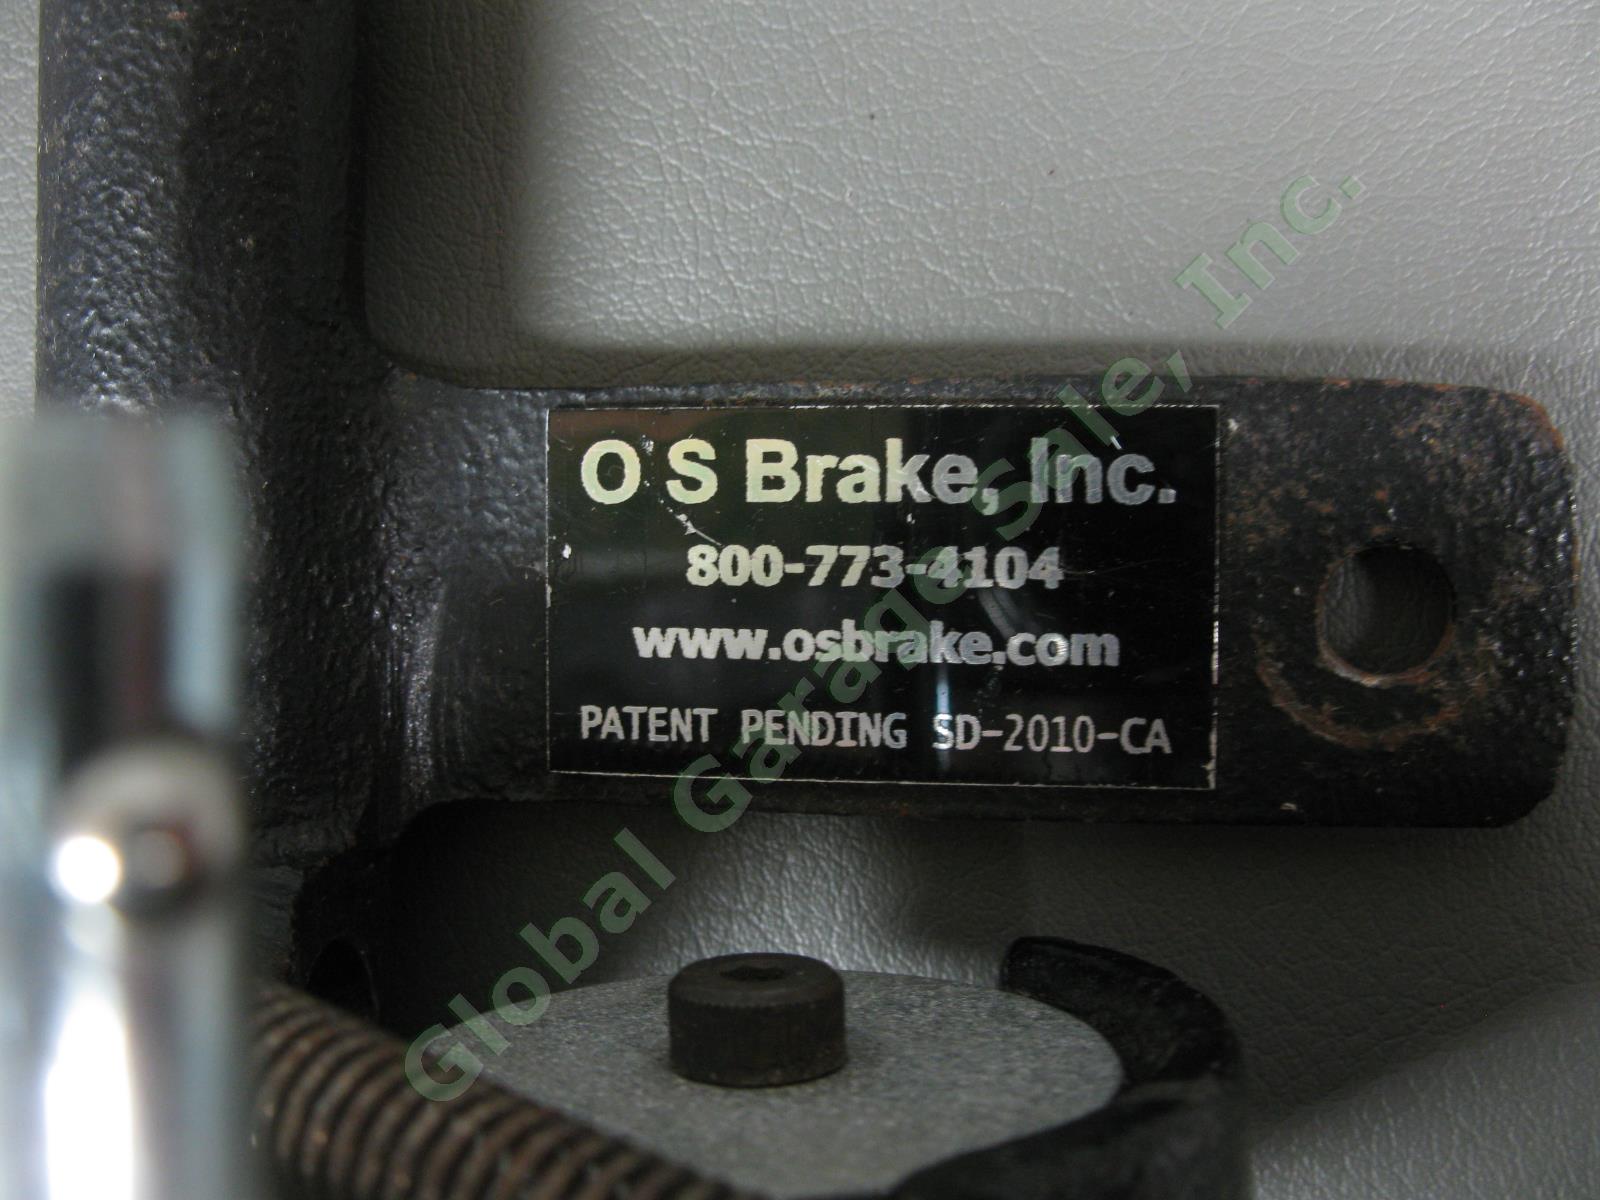 Ohio Safety Dual Control Brake Driver Instructor Ed Education Passenger Side NR 3